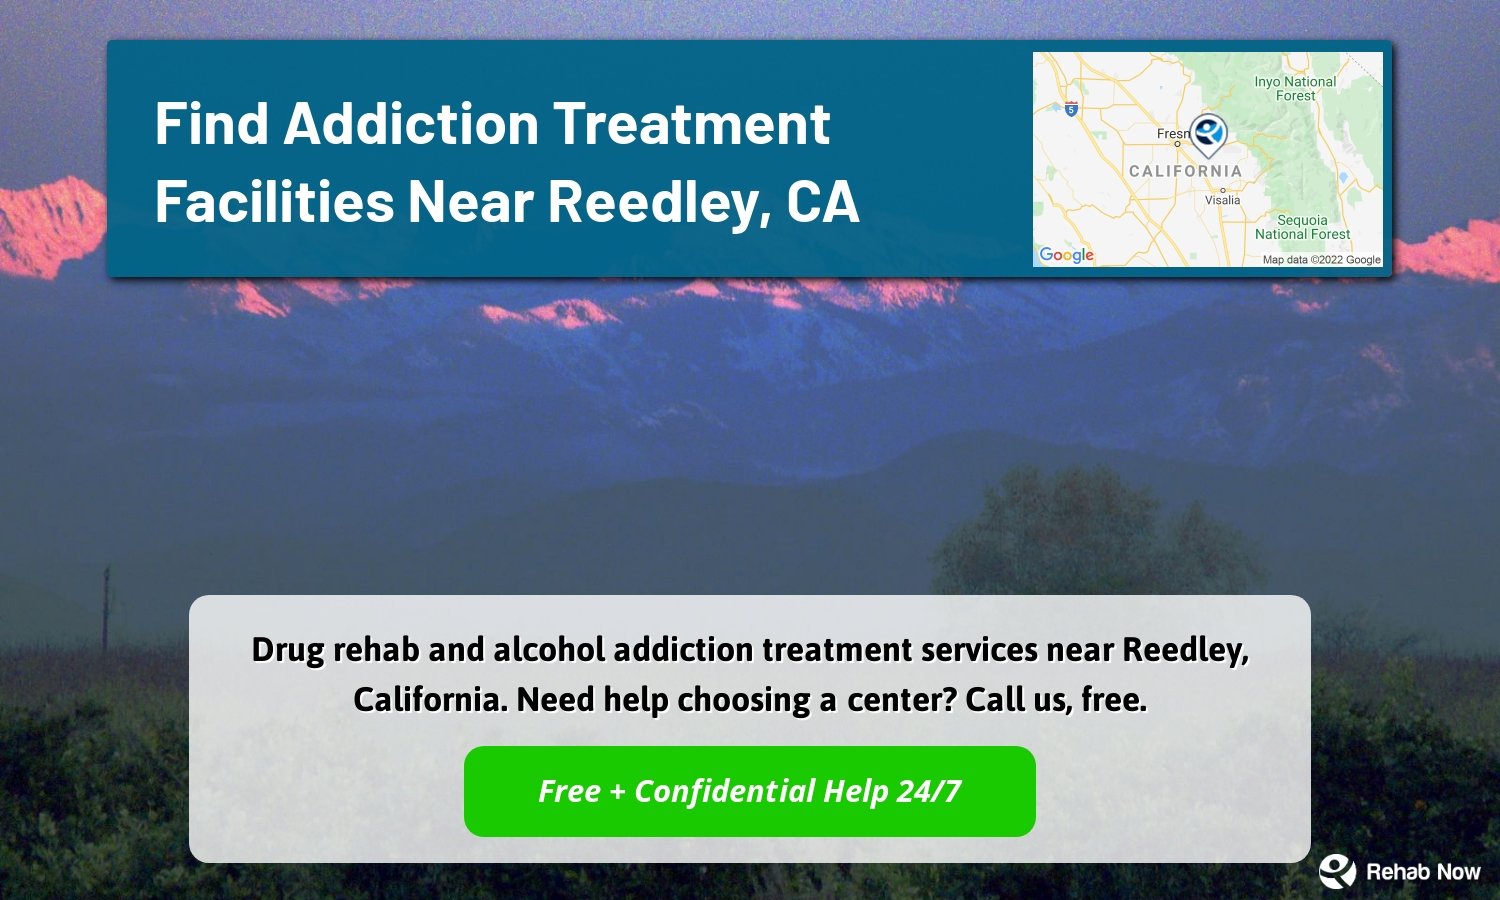 Drug rehab and alcohol addiction treatment services near Reedley, California. Need help choosing a center? Call us, free.